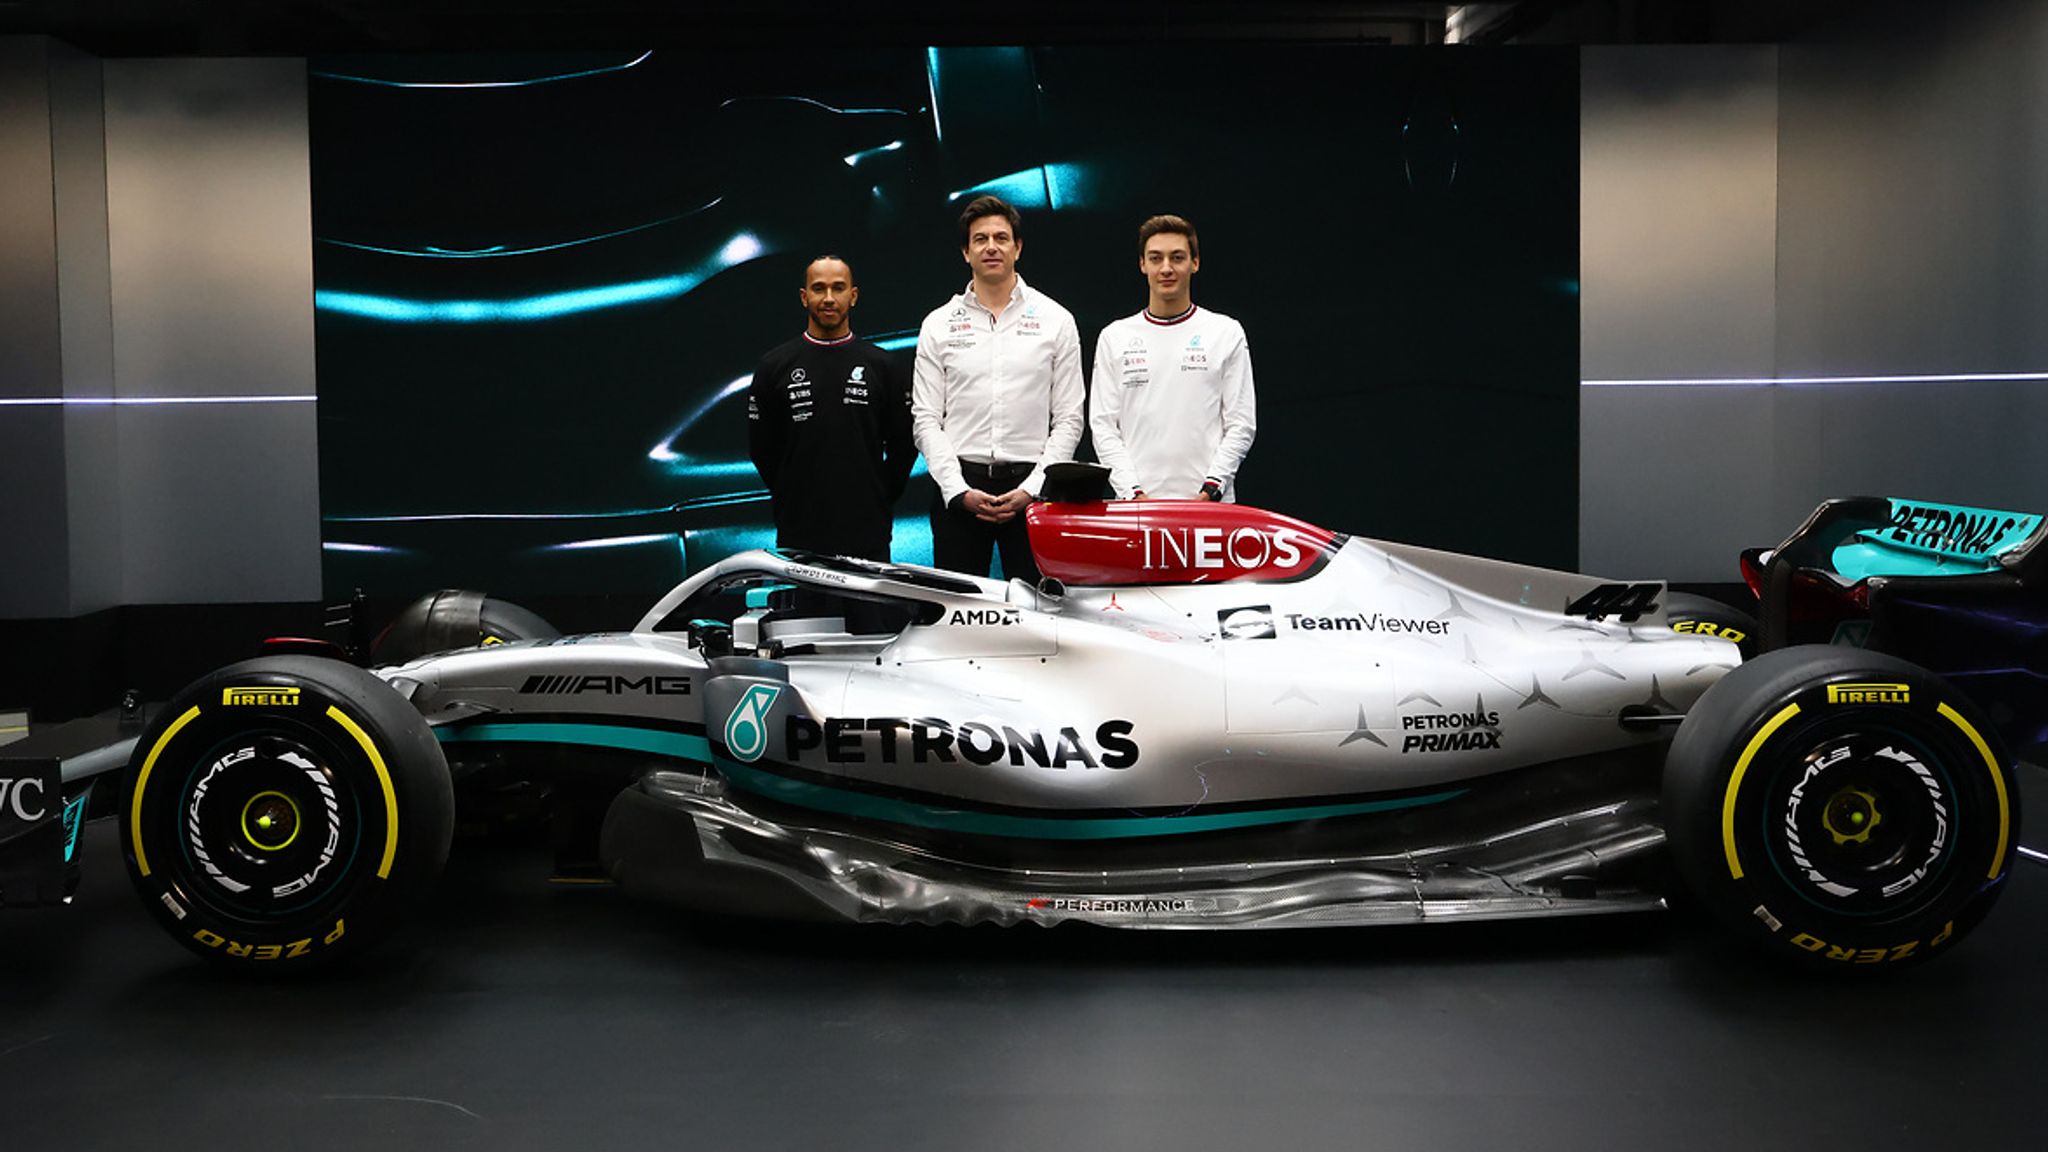 Lewis Hamilton relishing George Russell challenge at Mercedes for 2022 season